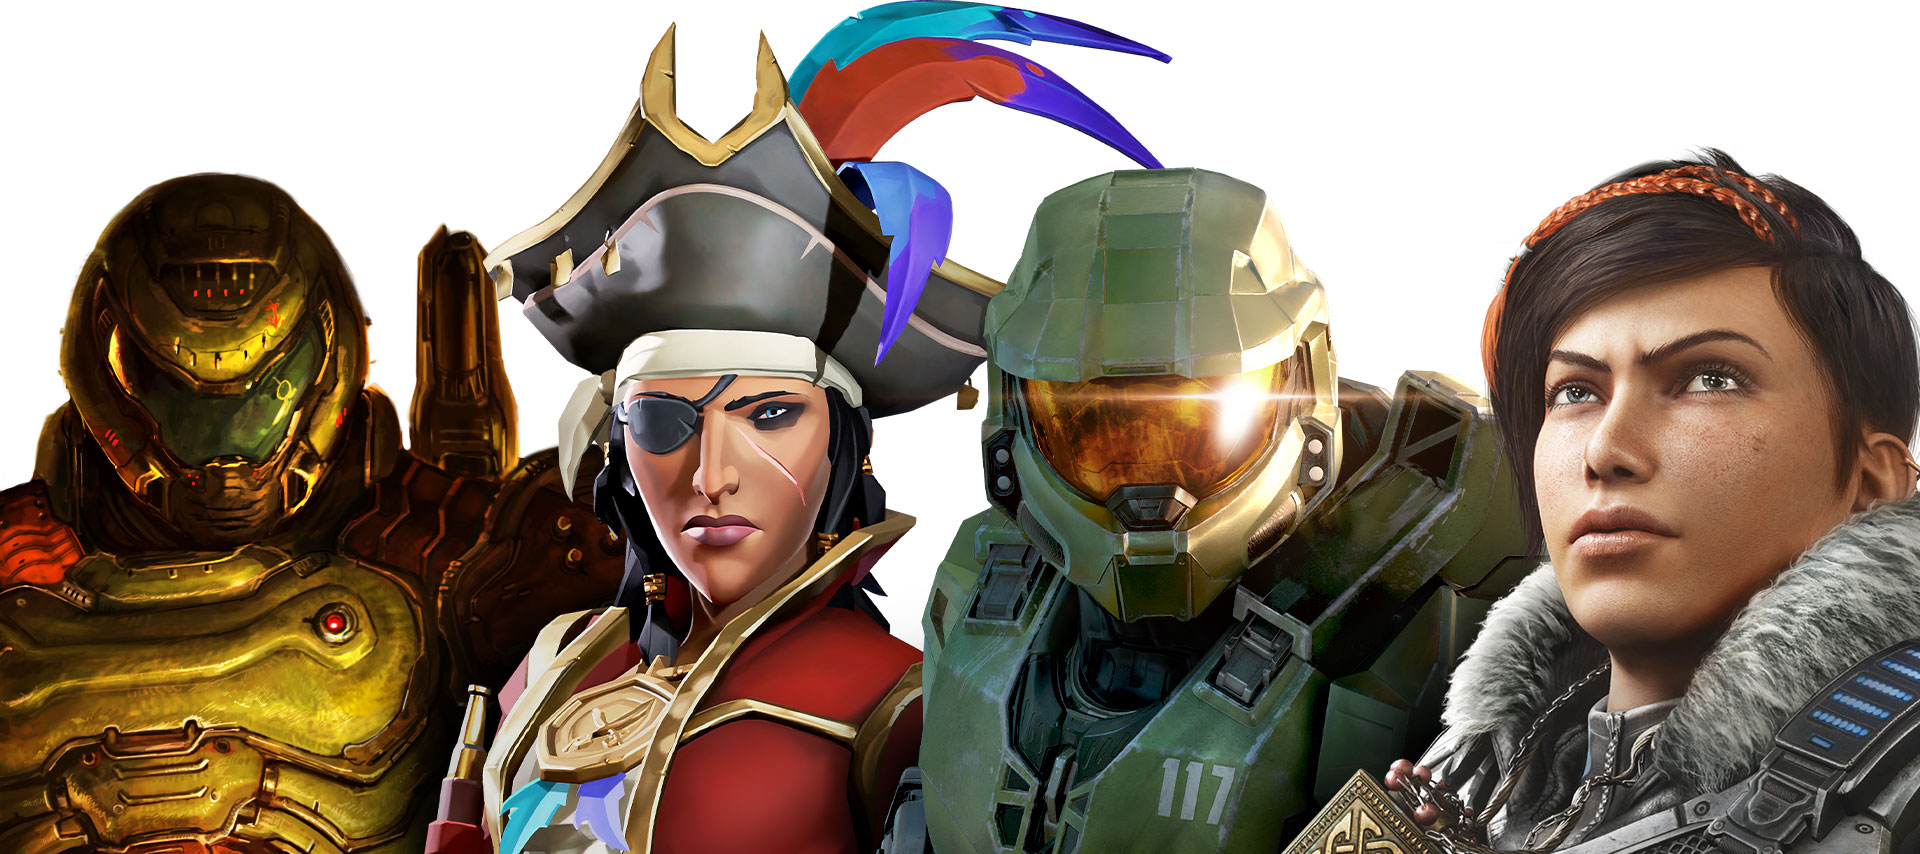 A line-up of characters featured in games on Xbox Game Pass. From left to right: DOOM Eternal, Sea of Thieves, Halo: Infinite and Gears 5.